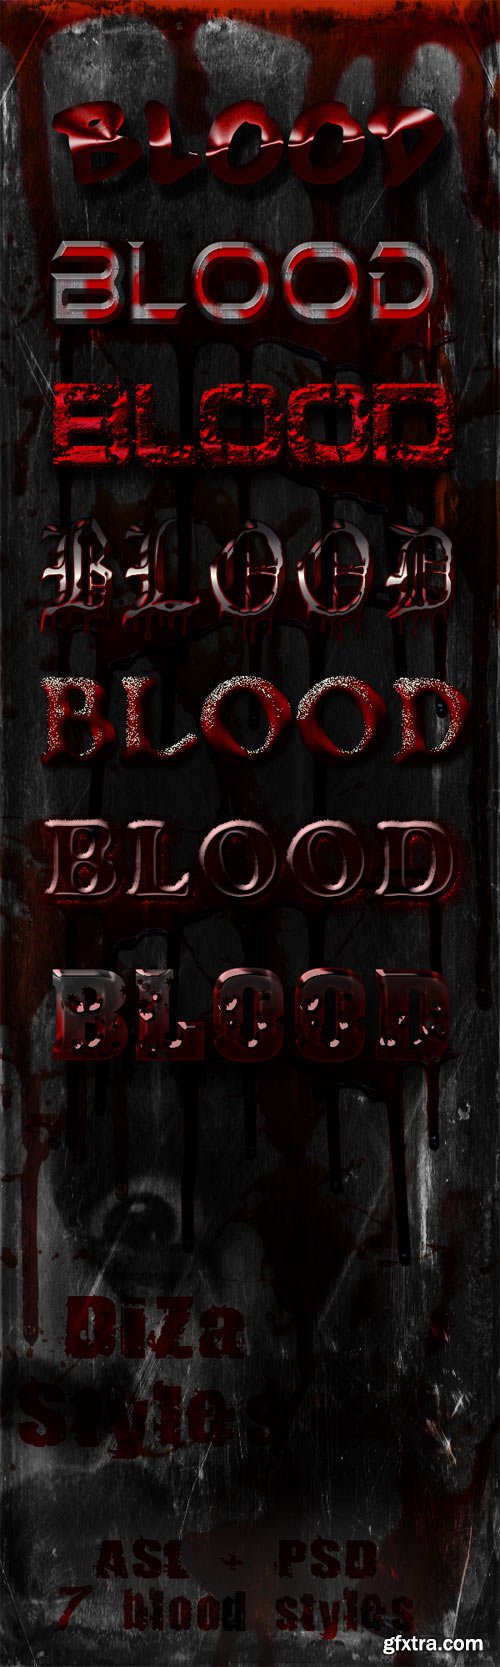 Horror styles of red blood